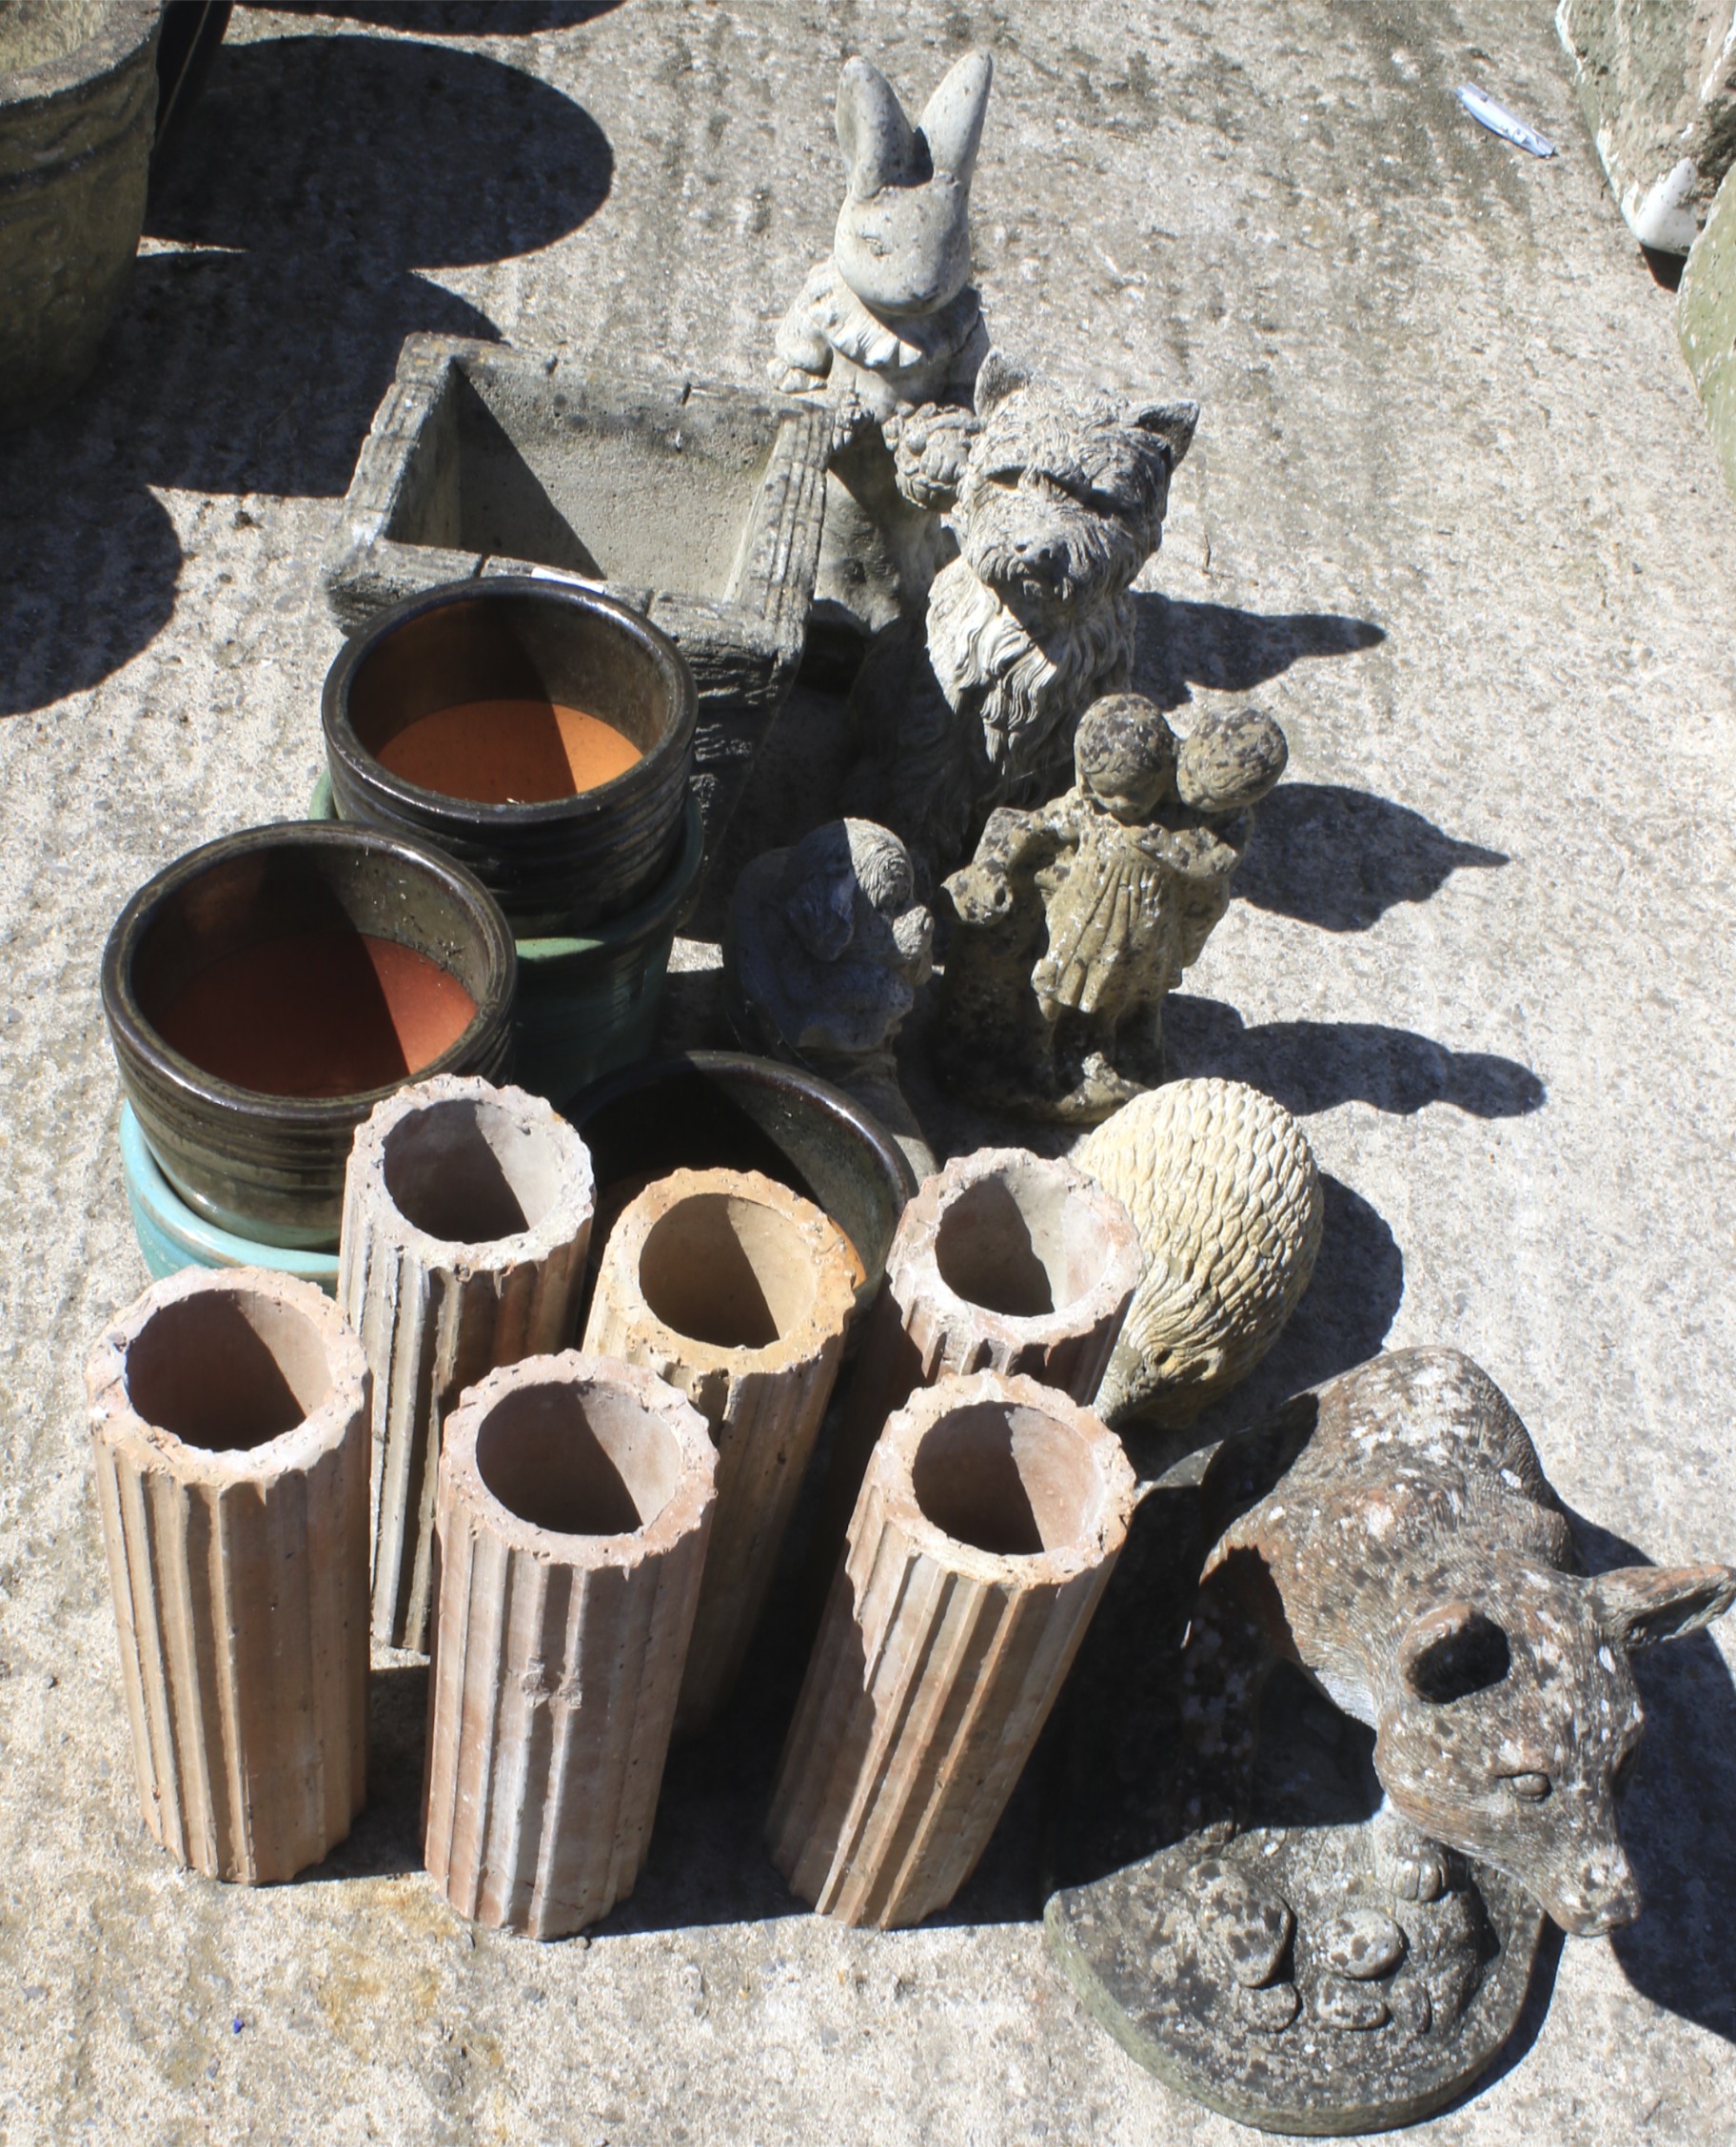 A collection of composite stone garden statues and pots.